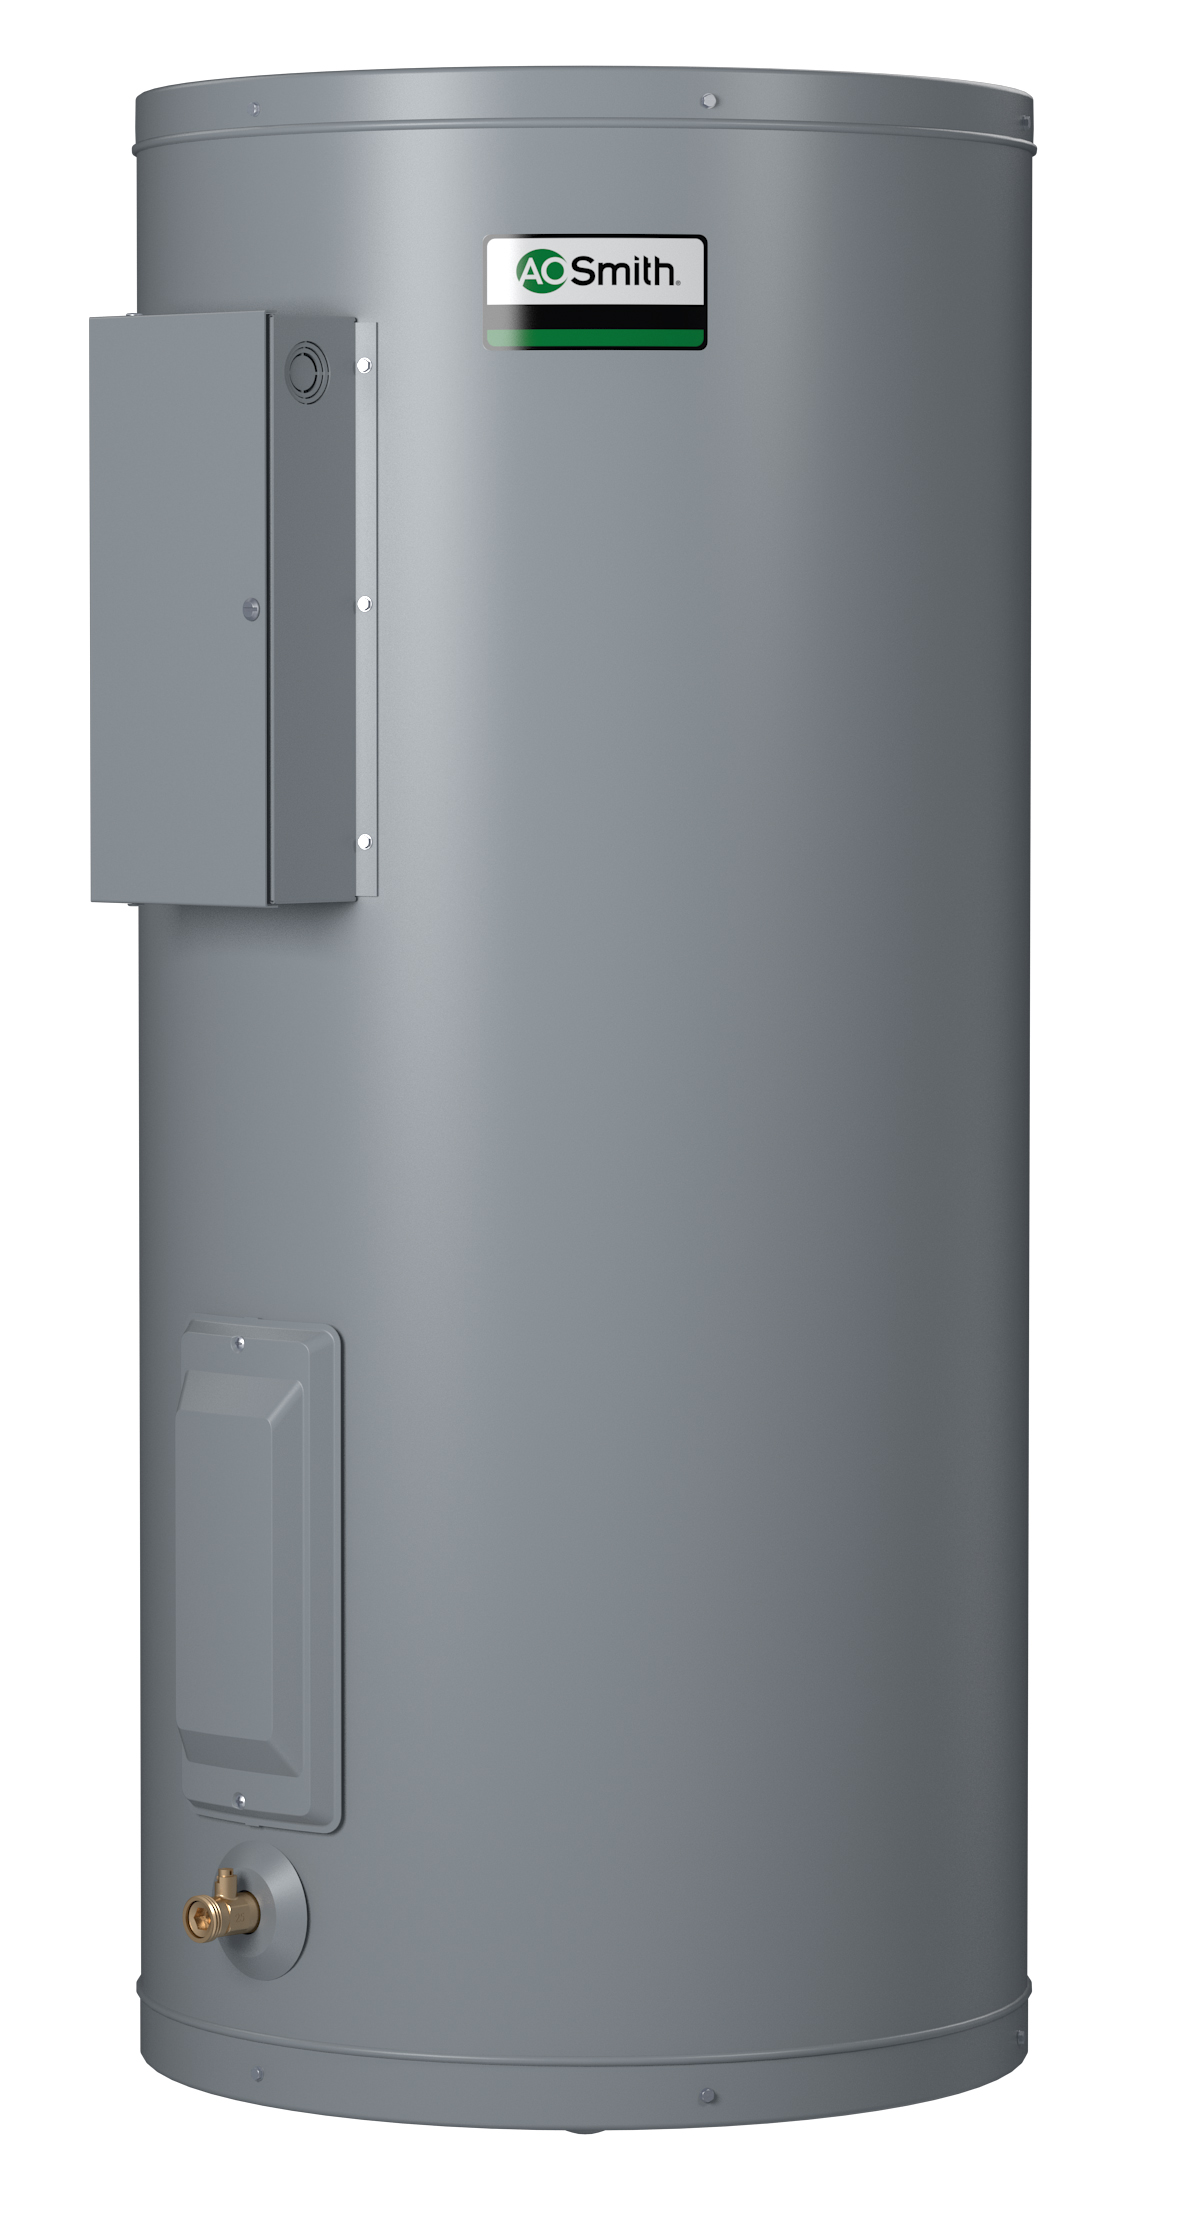 AO SMITH DEL-20S: 20 GALLONS, 3.0KW, 240 VOLT, 12.5 AMPS, 1 PHASE, SINGLE ELEMENT, LIGHT DUTY COMMERCIAL ELECTRIC WATER HEATER, DURA-POWER